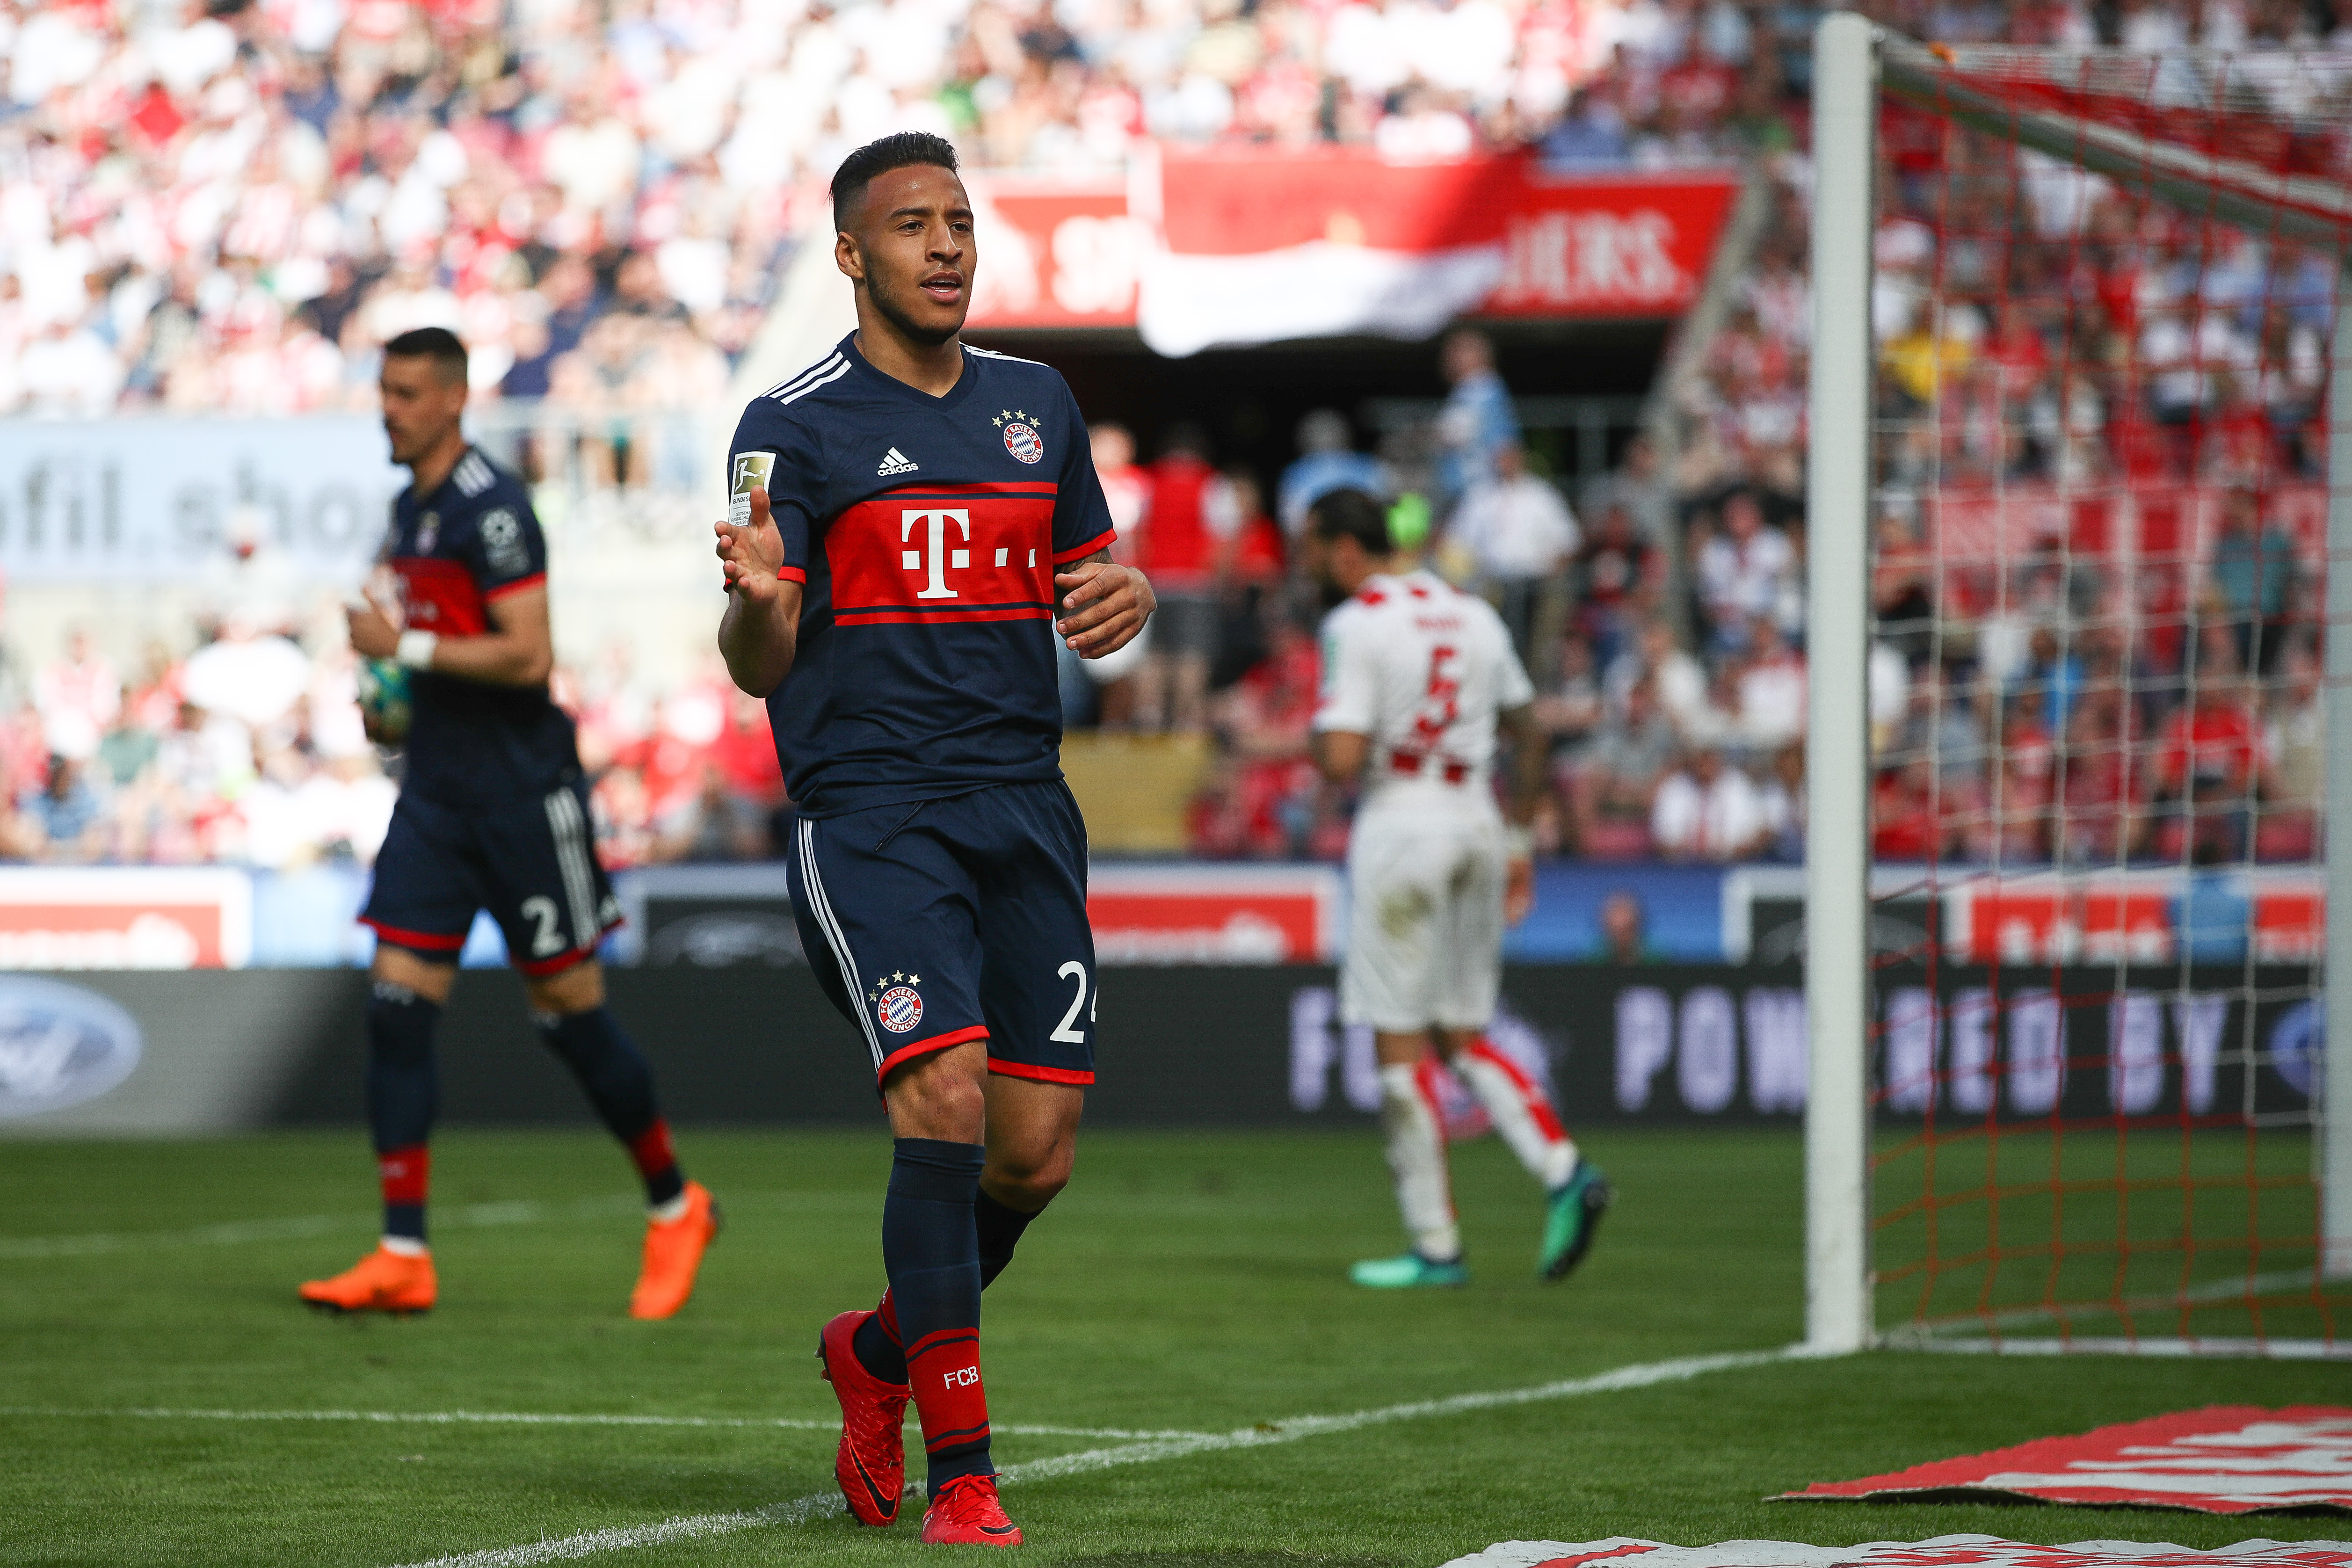 COLOGNE, GERMANY - MAY 05: Corentin Tolisso #24 of Bayern Munich celebrates after scoring a goal to make it 1-3 during the Bundesliga match between 1. FC Koeln and FC Bayern Muenchen at RheinEnergieStadion on May 5, 2018 in Cologne, Germany. (Photo by Maja Hitij/Bongarts/Getty Images)